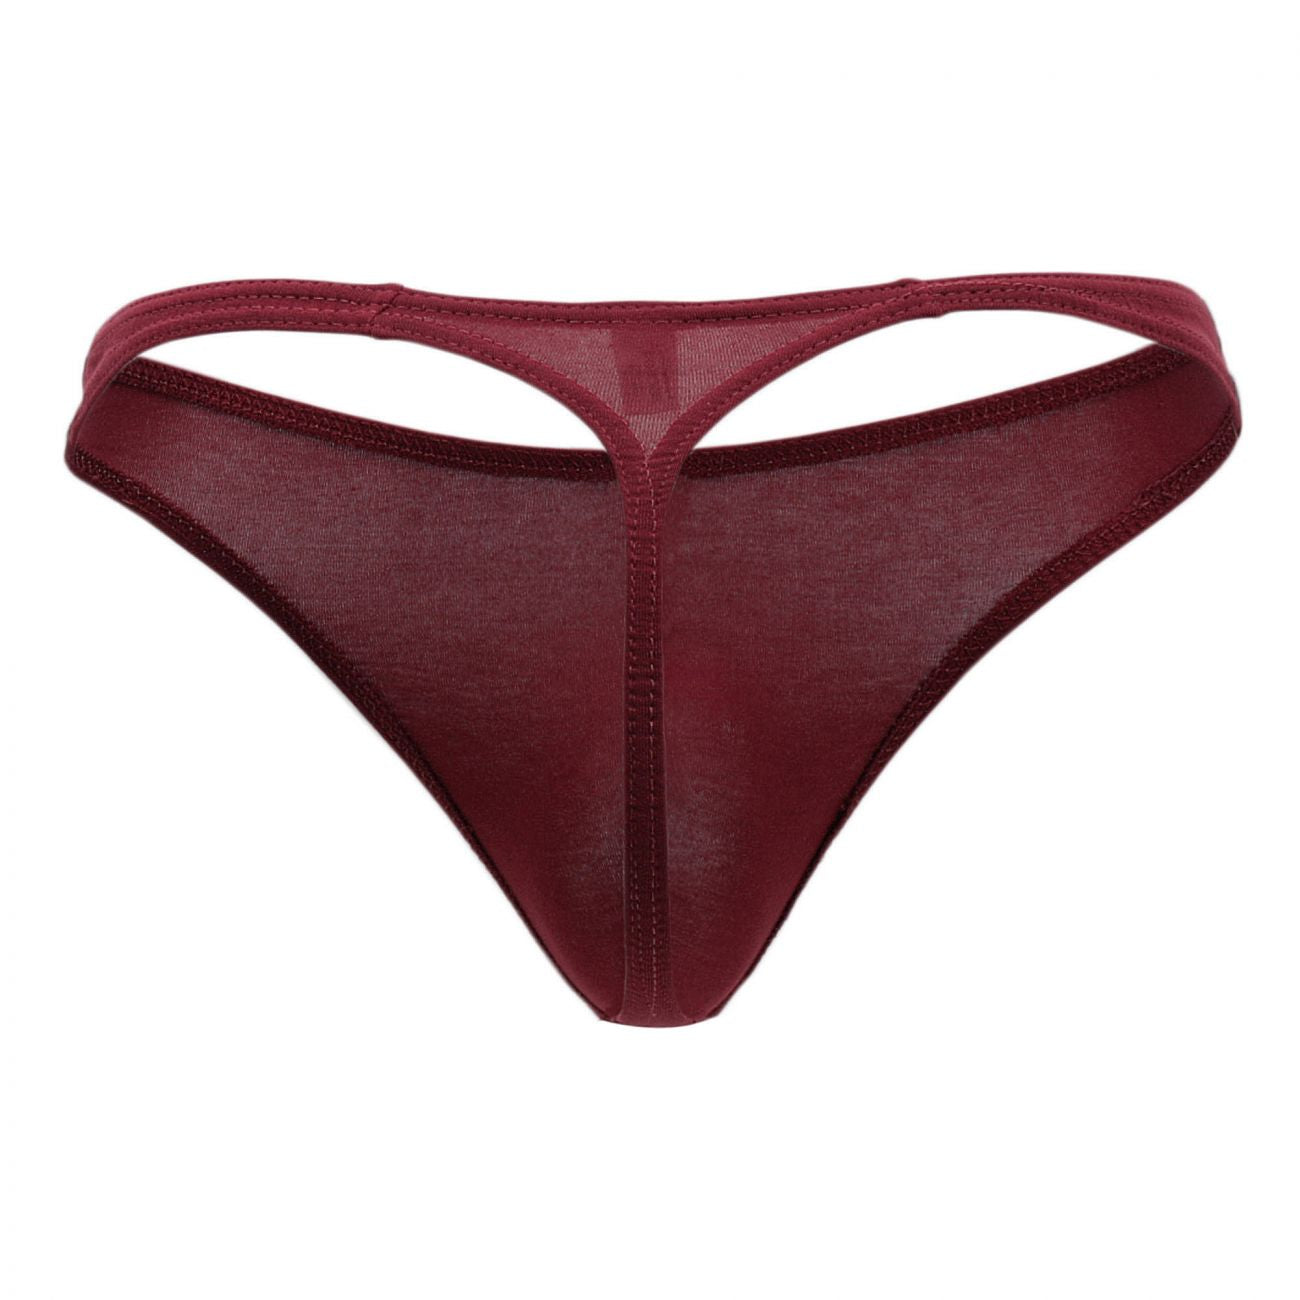 under-yours - Hang-loose Thong - Doreanse - Mens Underwear